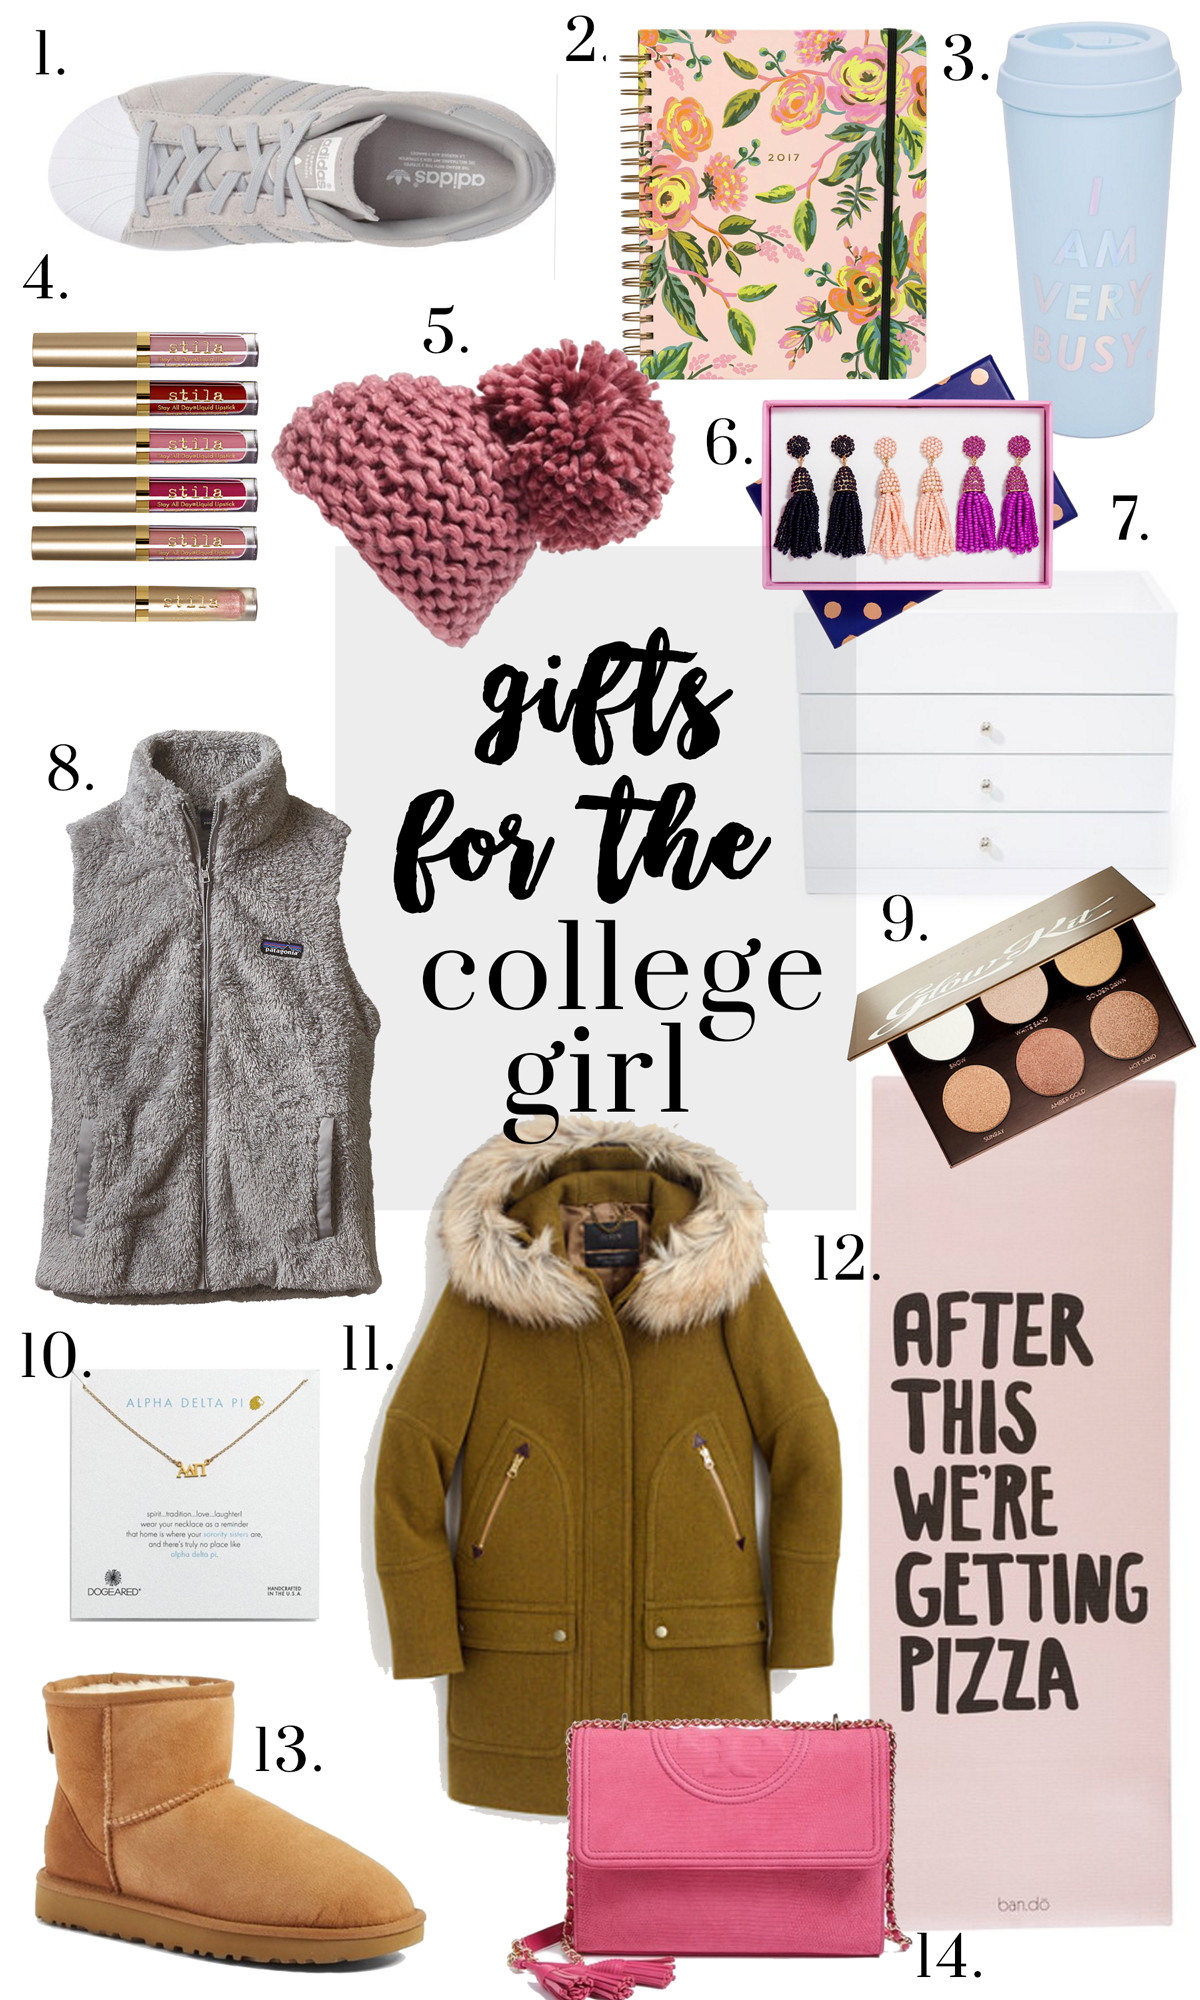 Valentine Gift Ideas For College Daughter
 Gifts perfect for college girls AOL Lifestyle